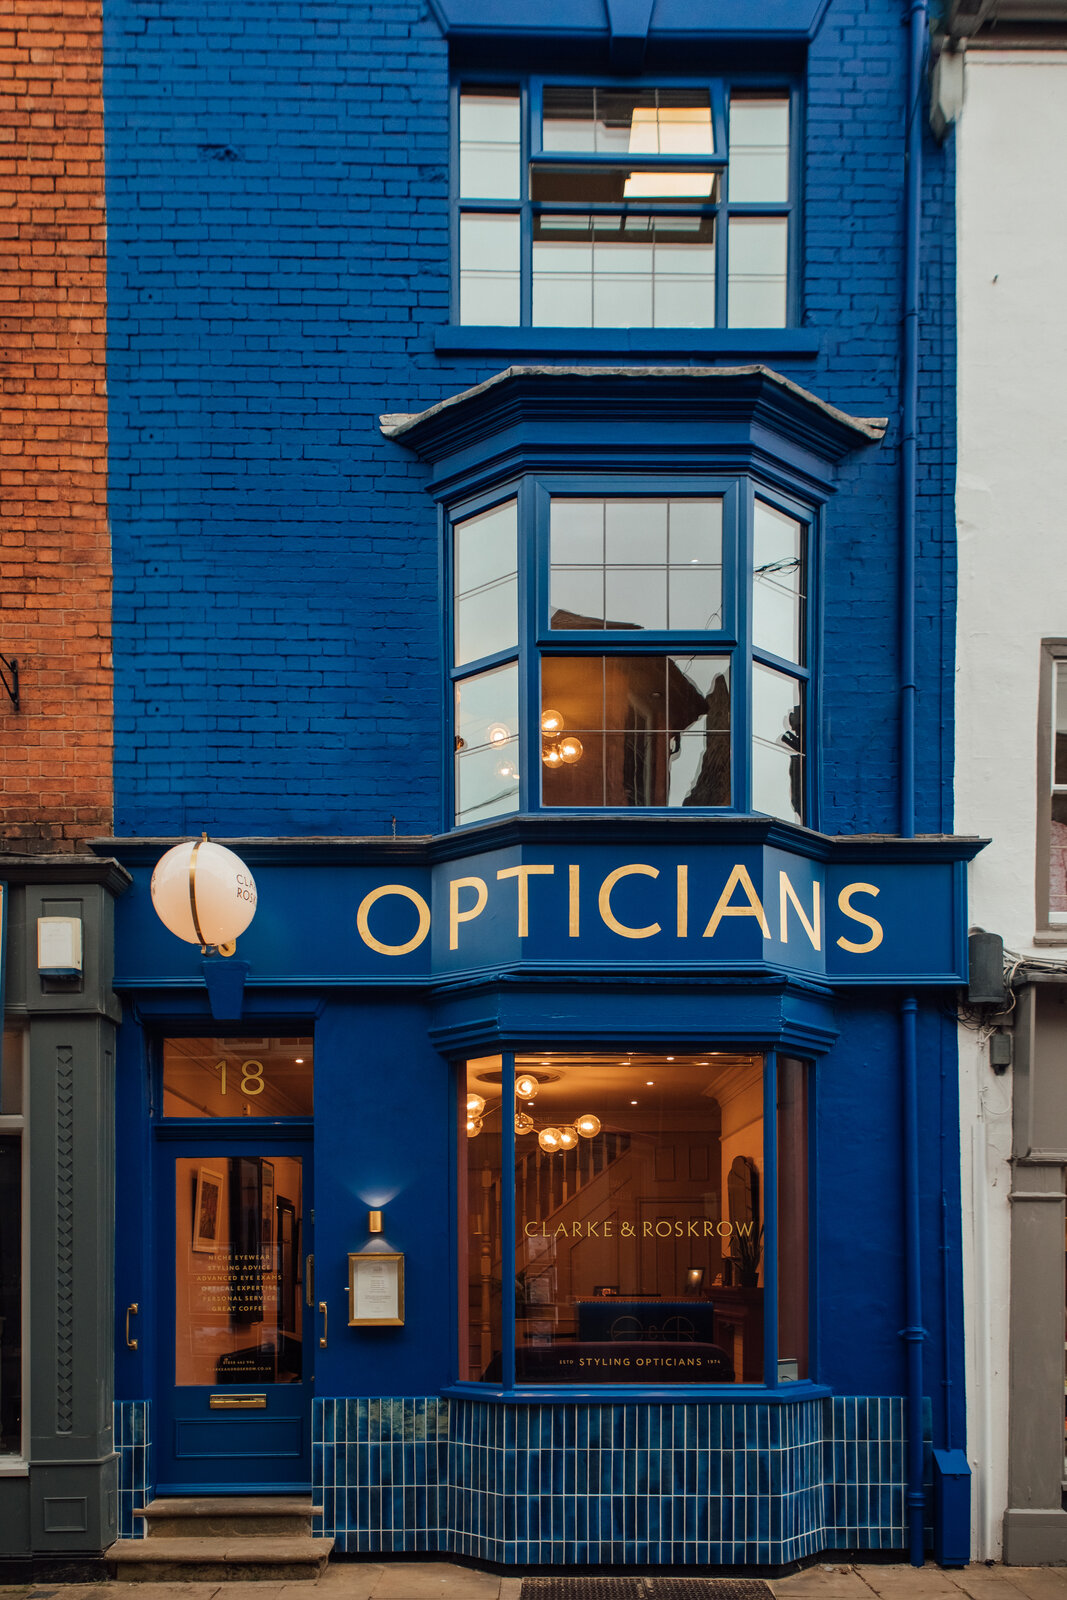 Clarke & Roskrow Opticians - Creating a modern traditional British shopfront